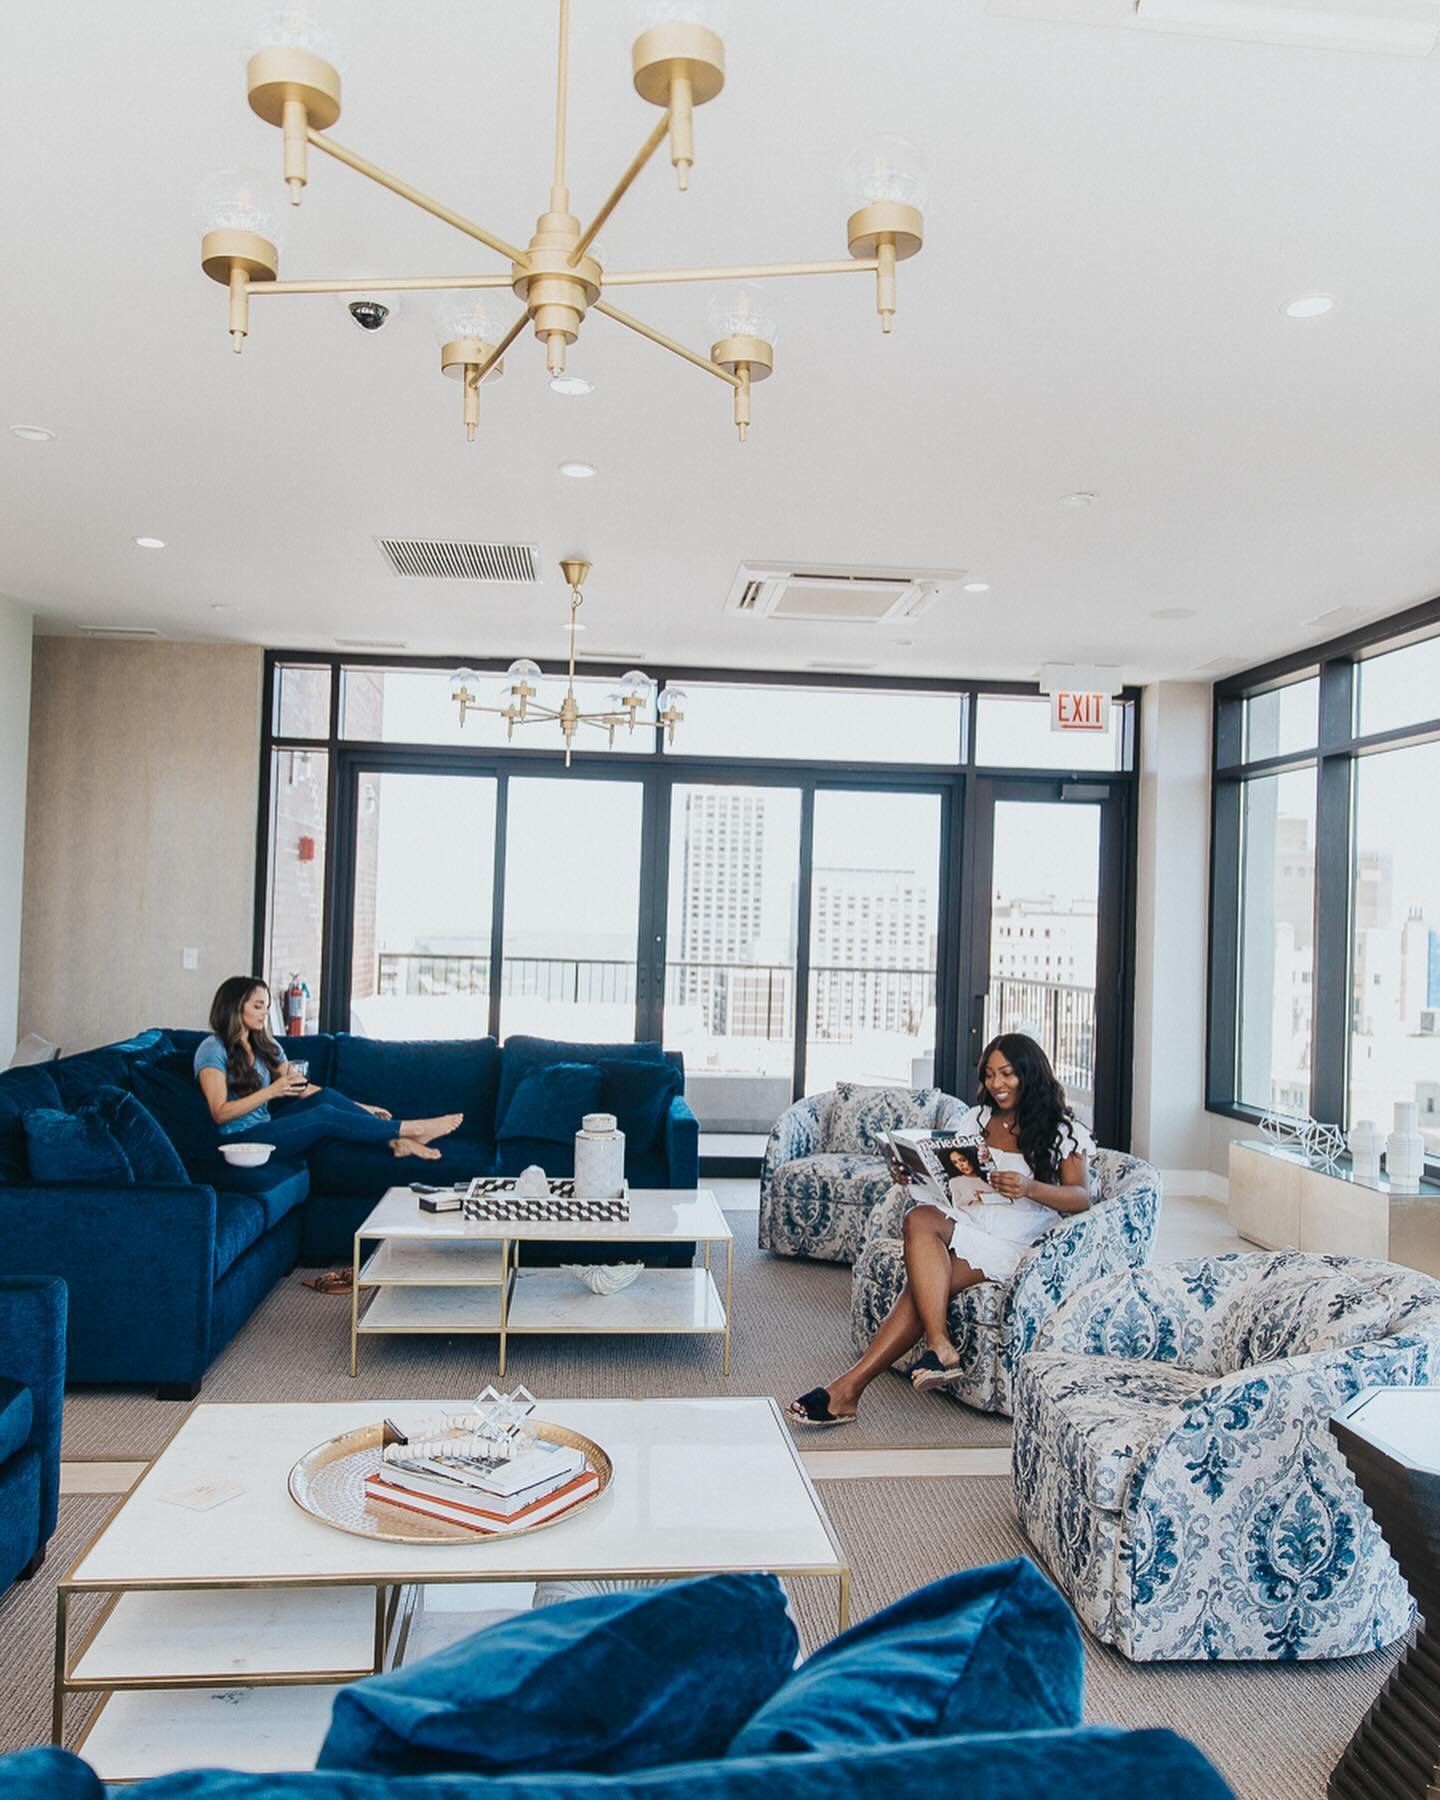 Luxury living in Chicago can be found on almost every block. 

When it comes to SMM campaigns, our agency has developed a fool proof process to help uncover your property&rsquo;s key differentiators and brand pillars. Is it views? Amenities? Convenie